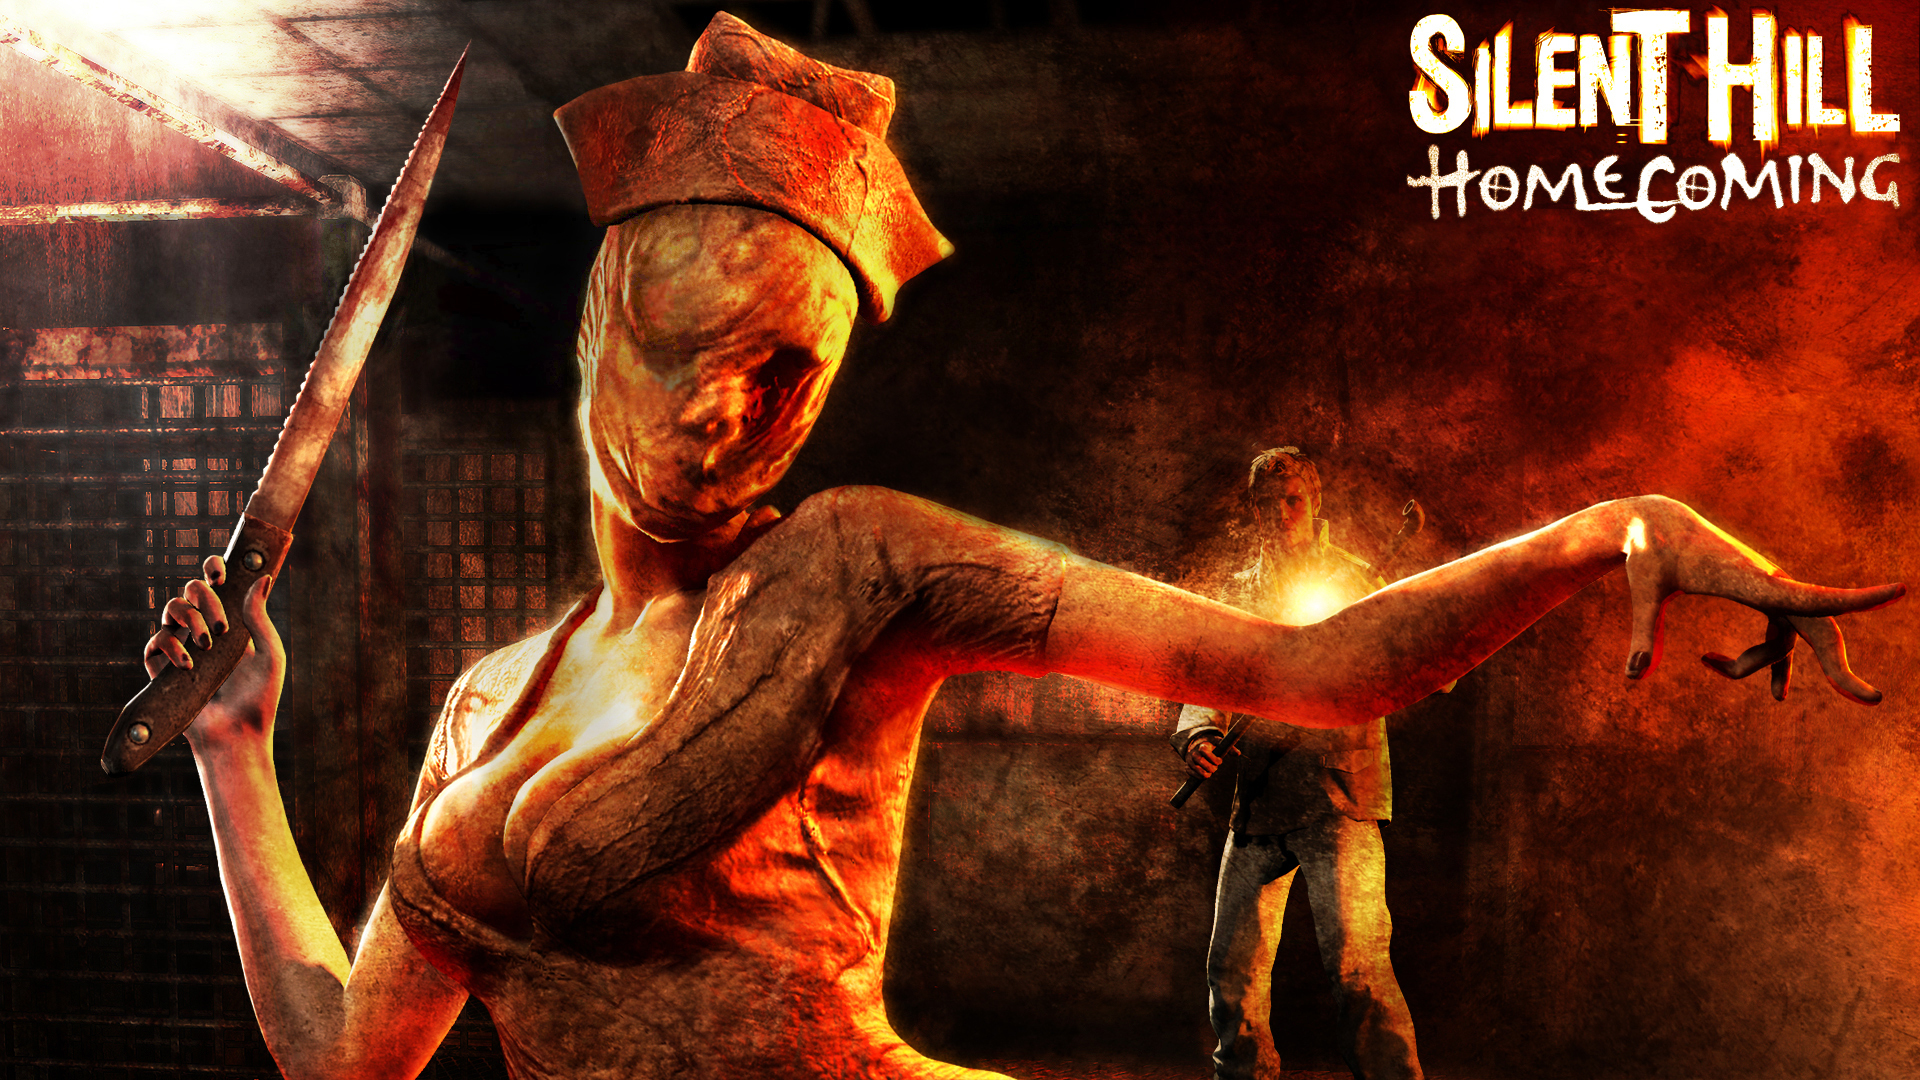 Silent Hill 4 Wallpapers